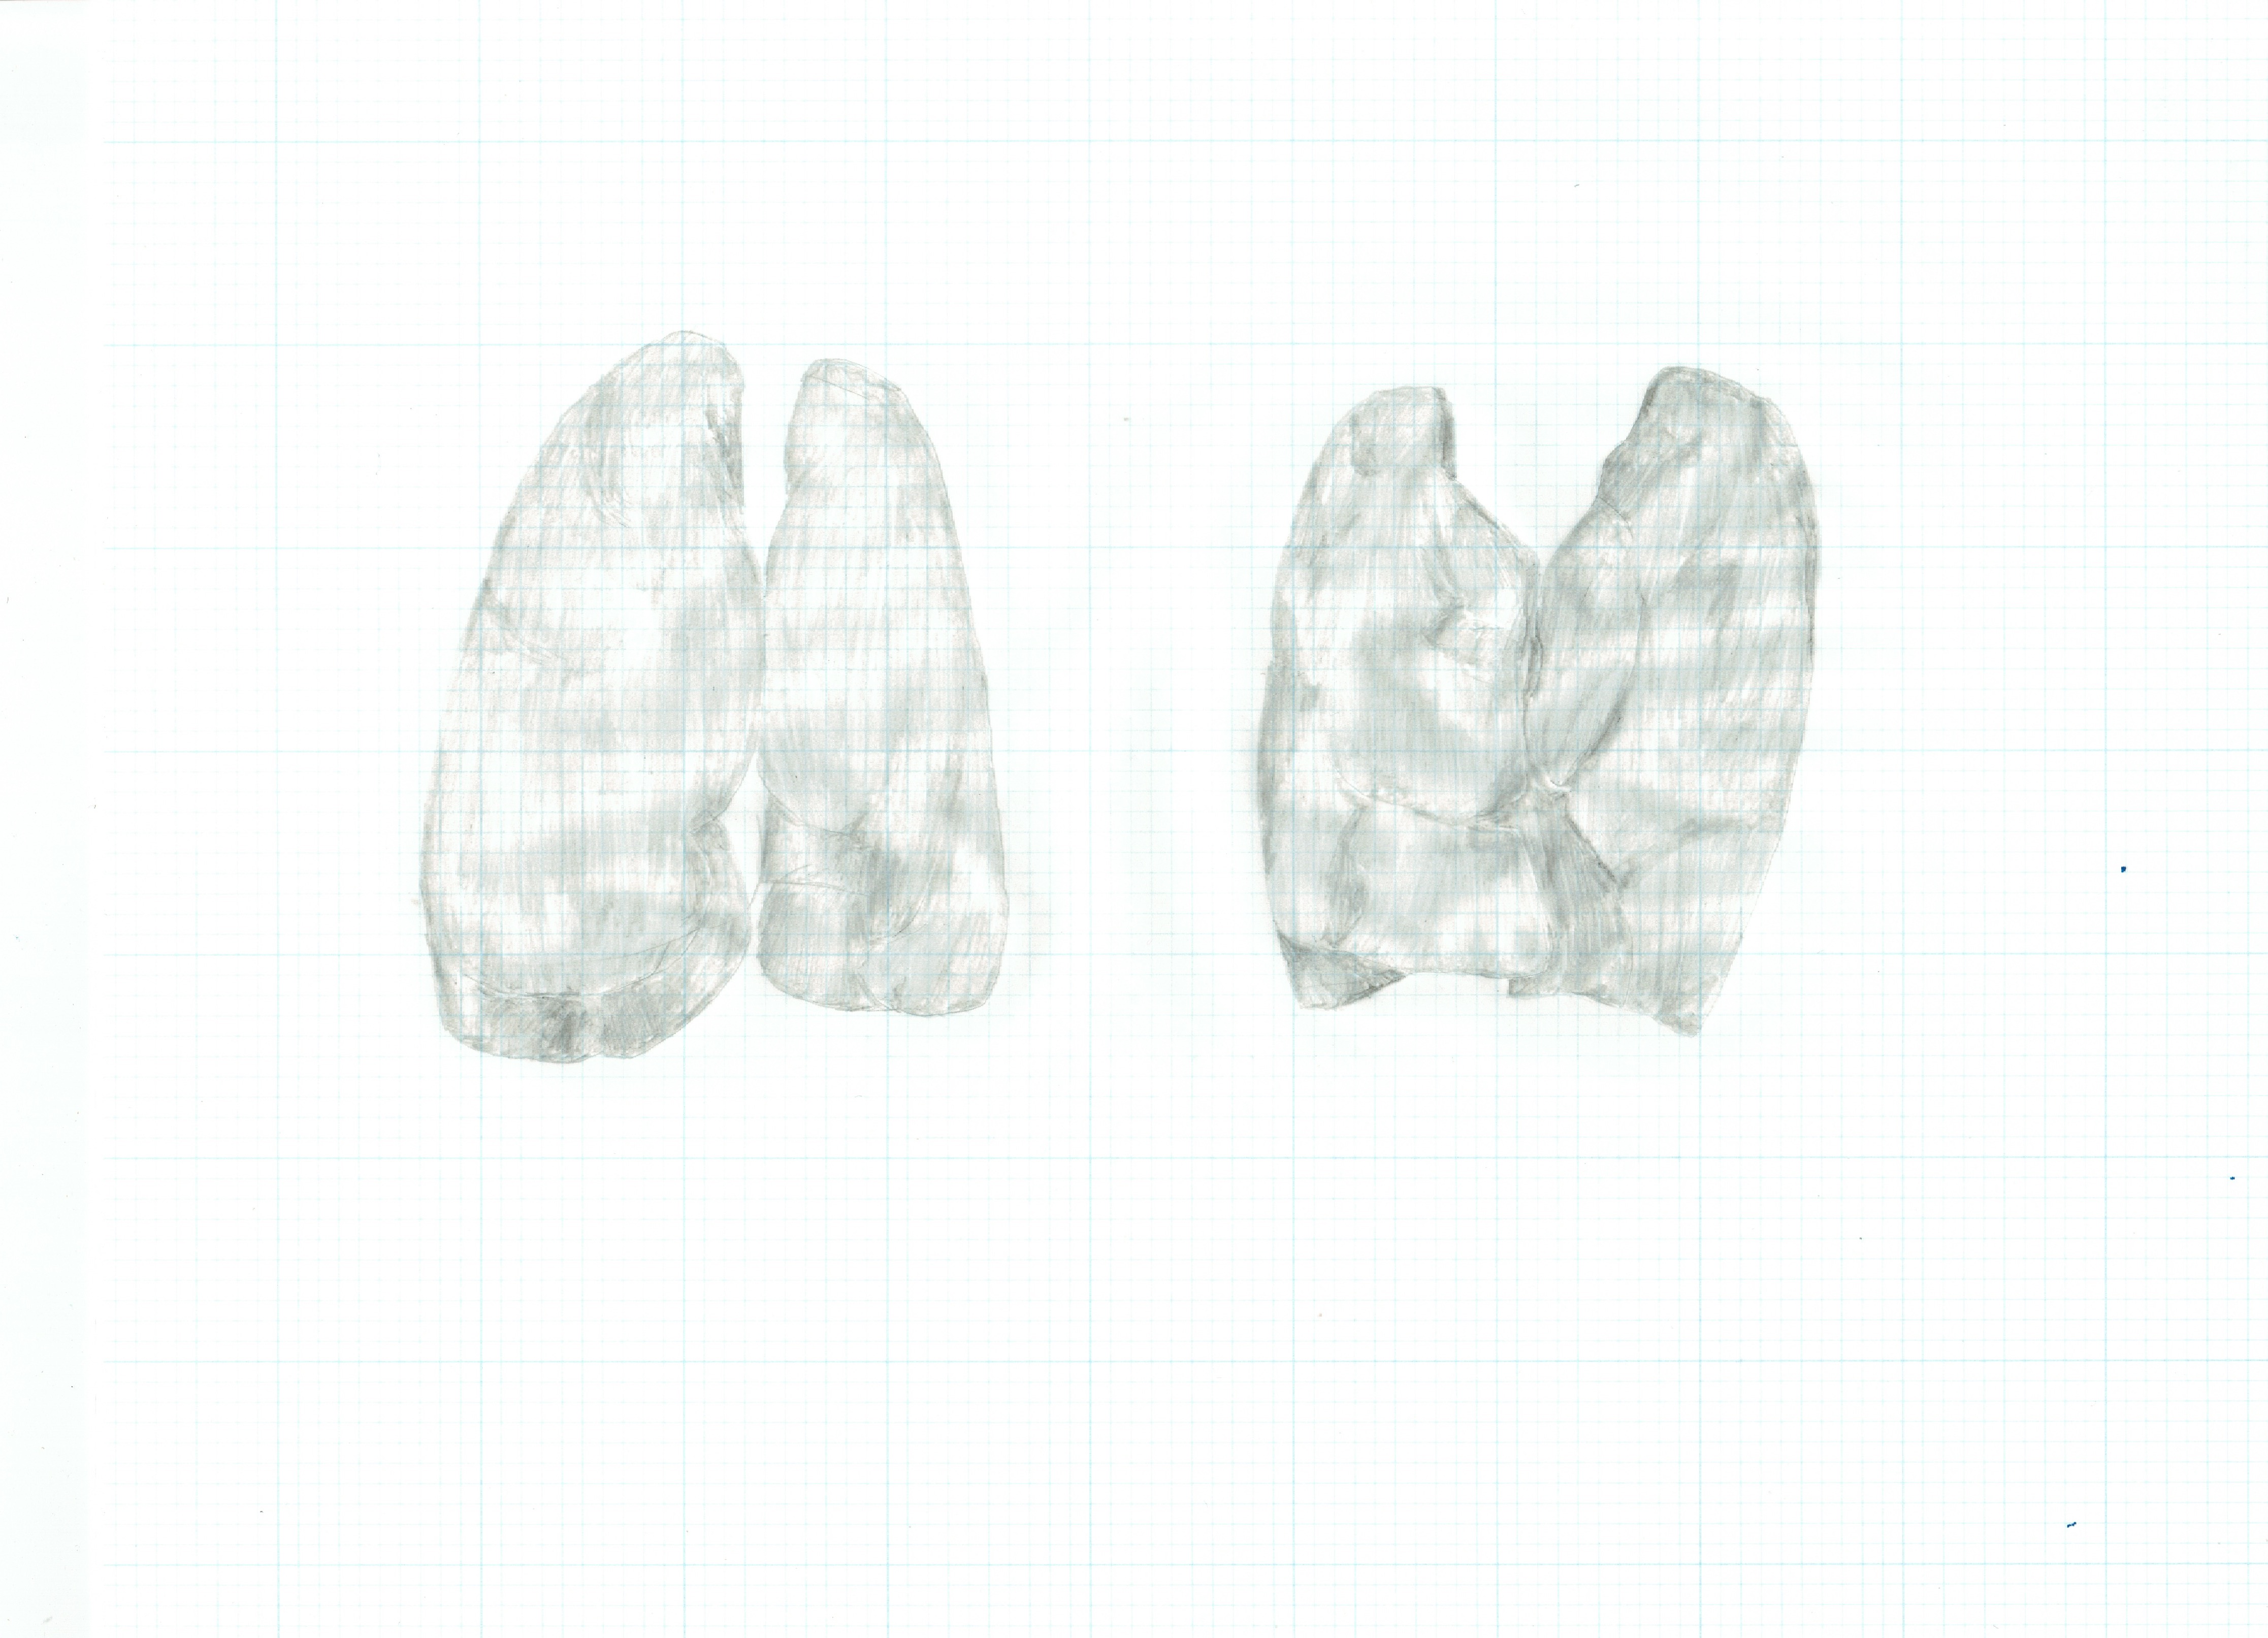 pencil drawing of two pairs of lungs side by side